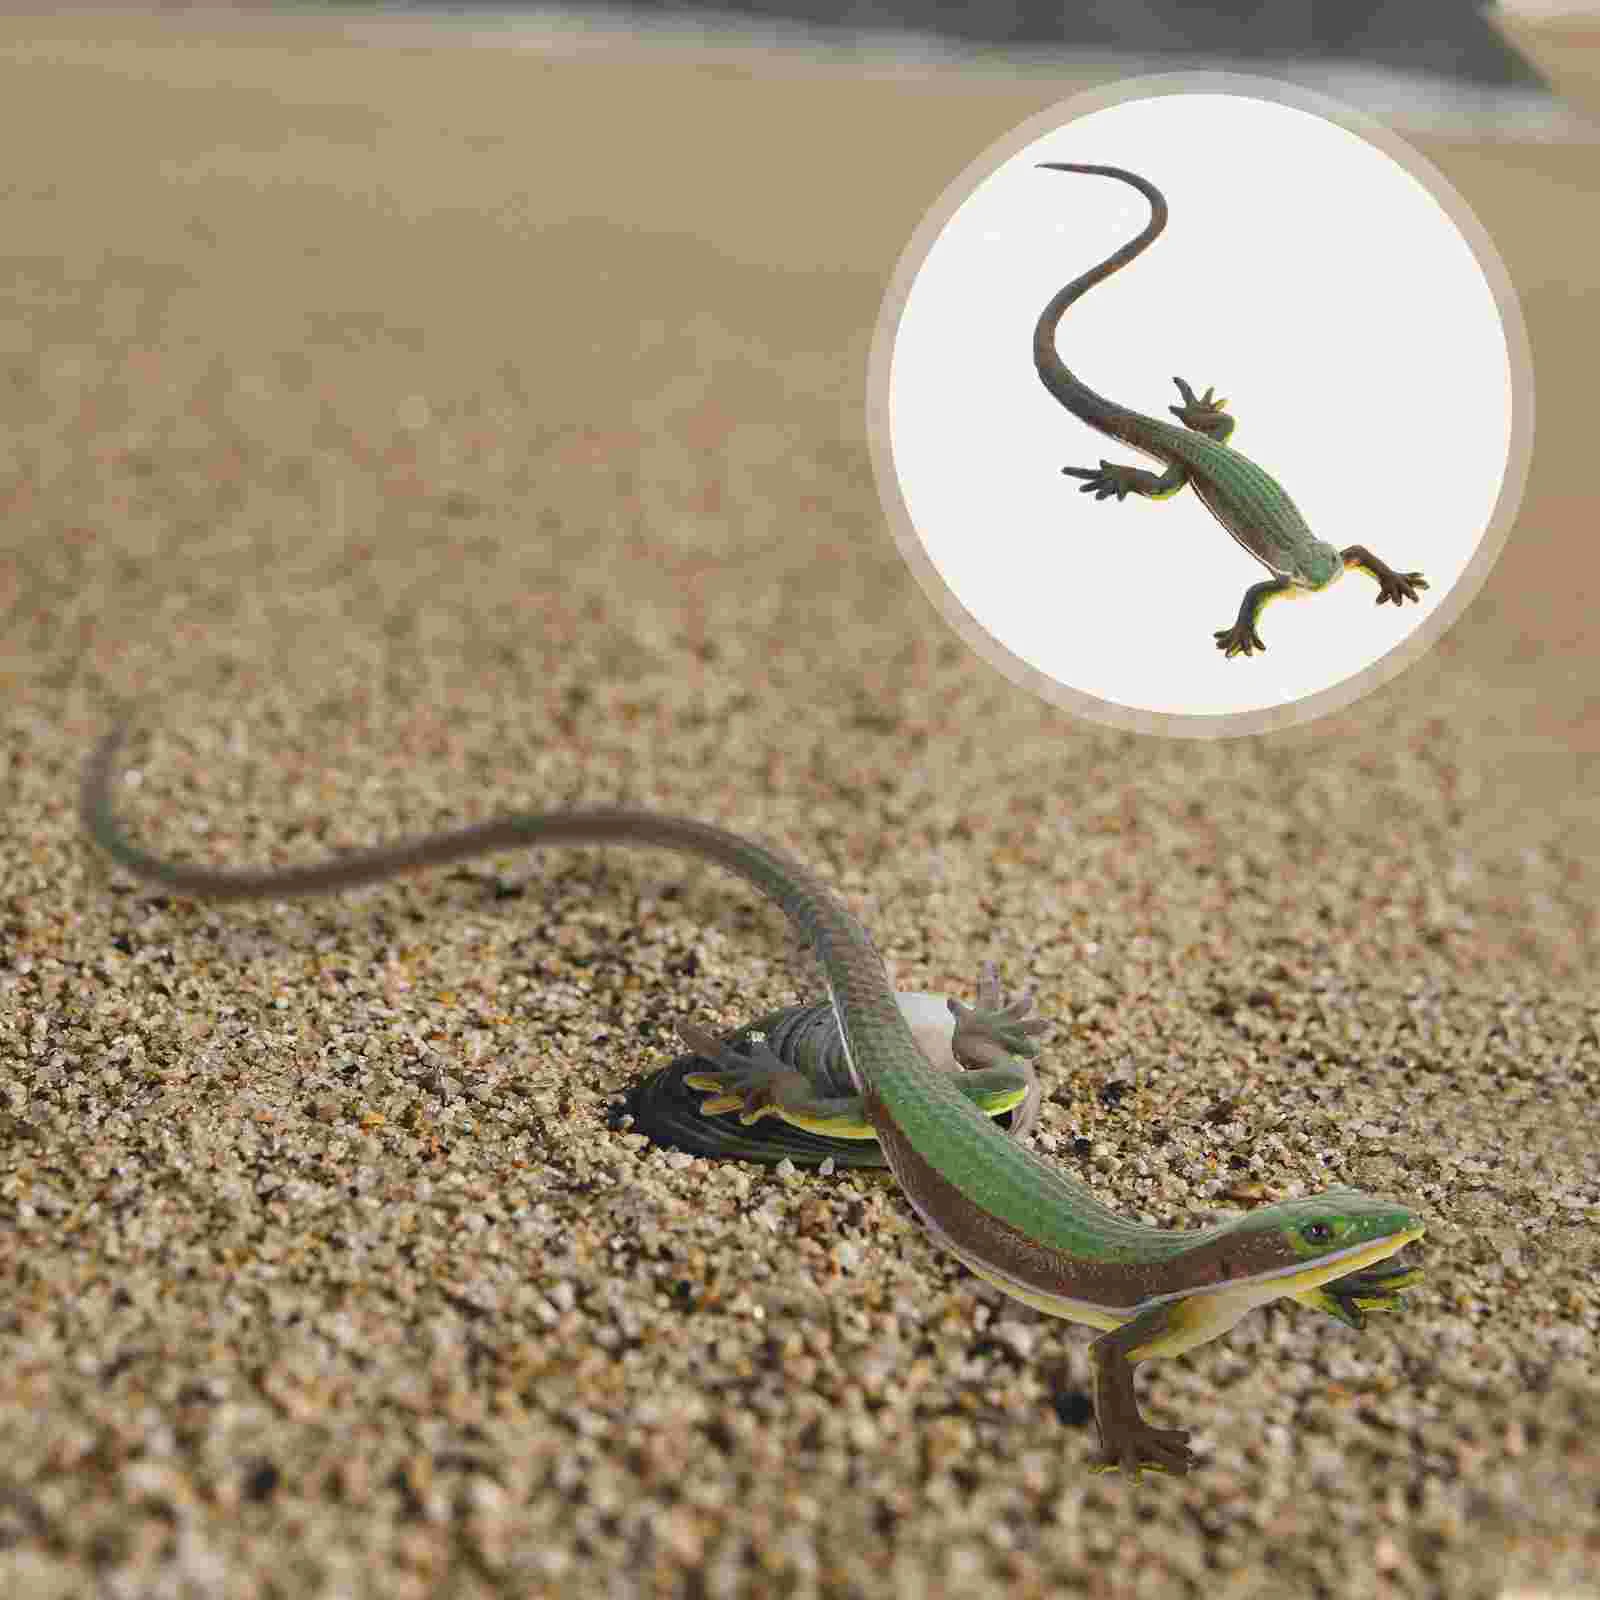 

Realistic Fake Lizards Artificial Reptile 1Pc Animal Toyss Plastic Lizards Action Figures Halloween April Fools Day Pranks